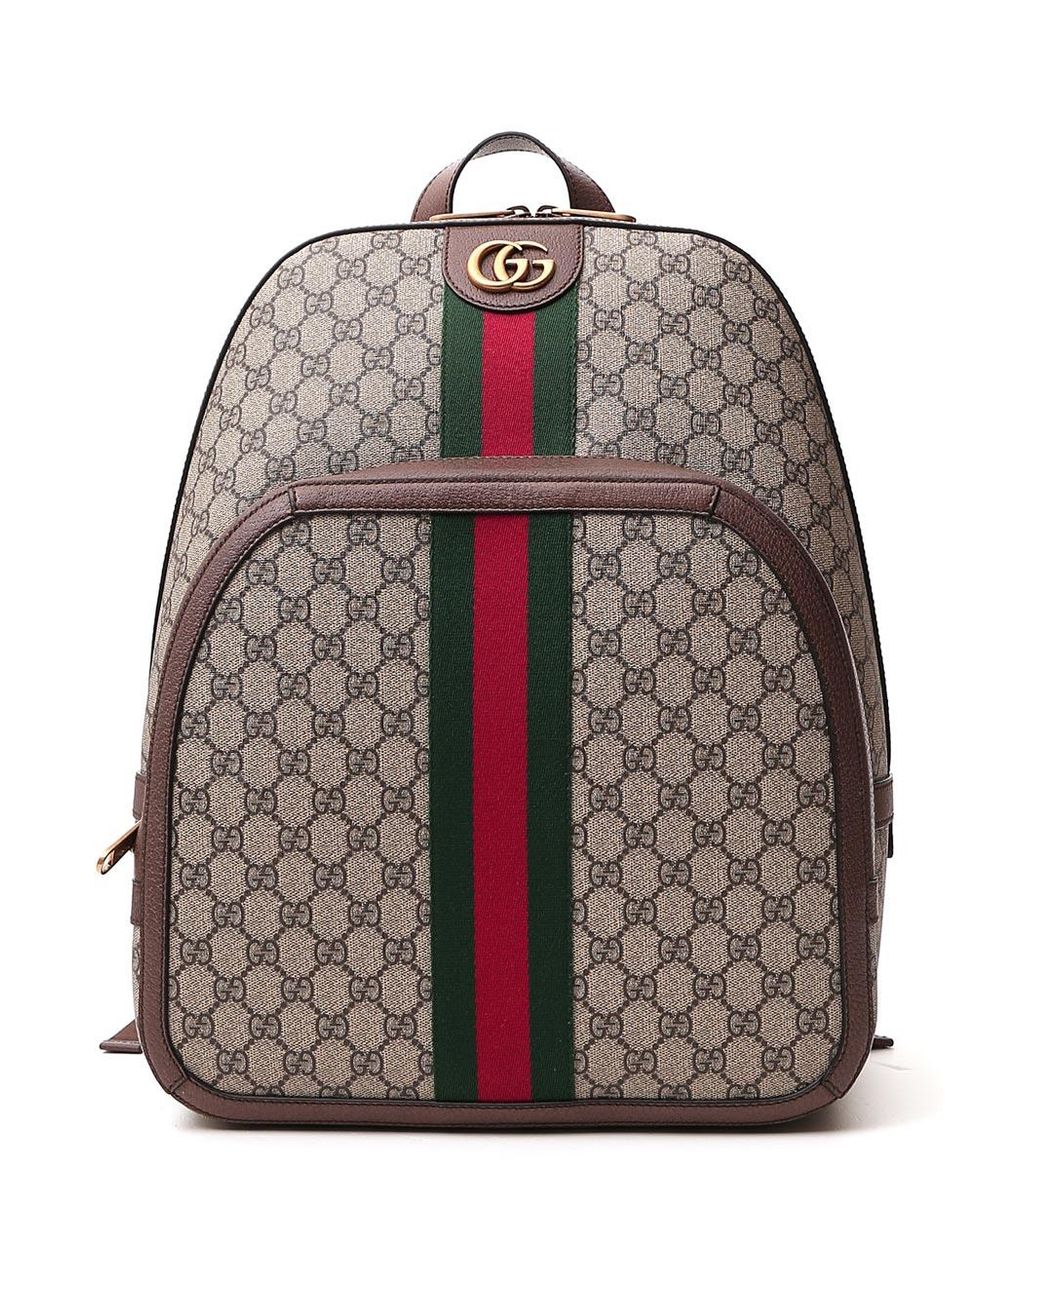 Gucci - Ophidia GG Medium Backpack for Men - Save 31% - Lyst